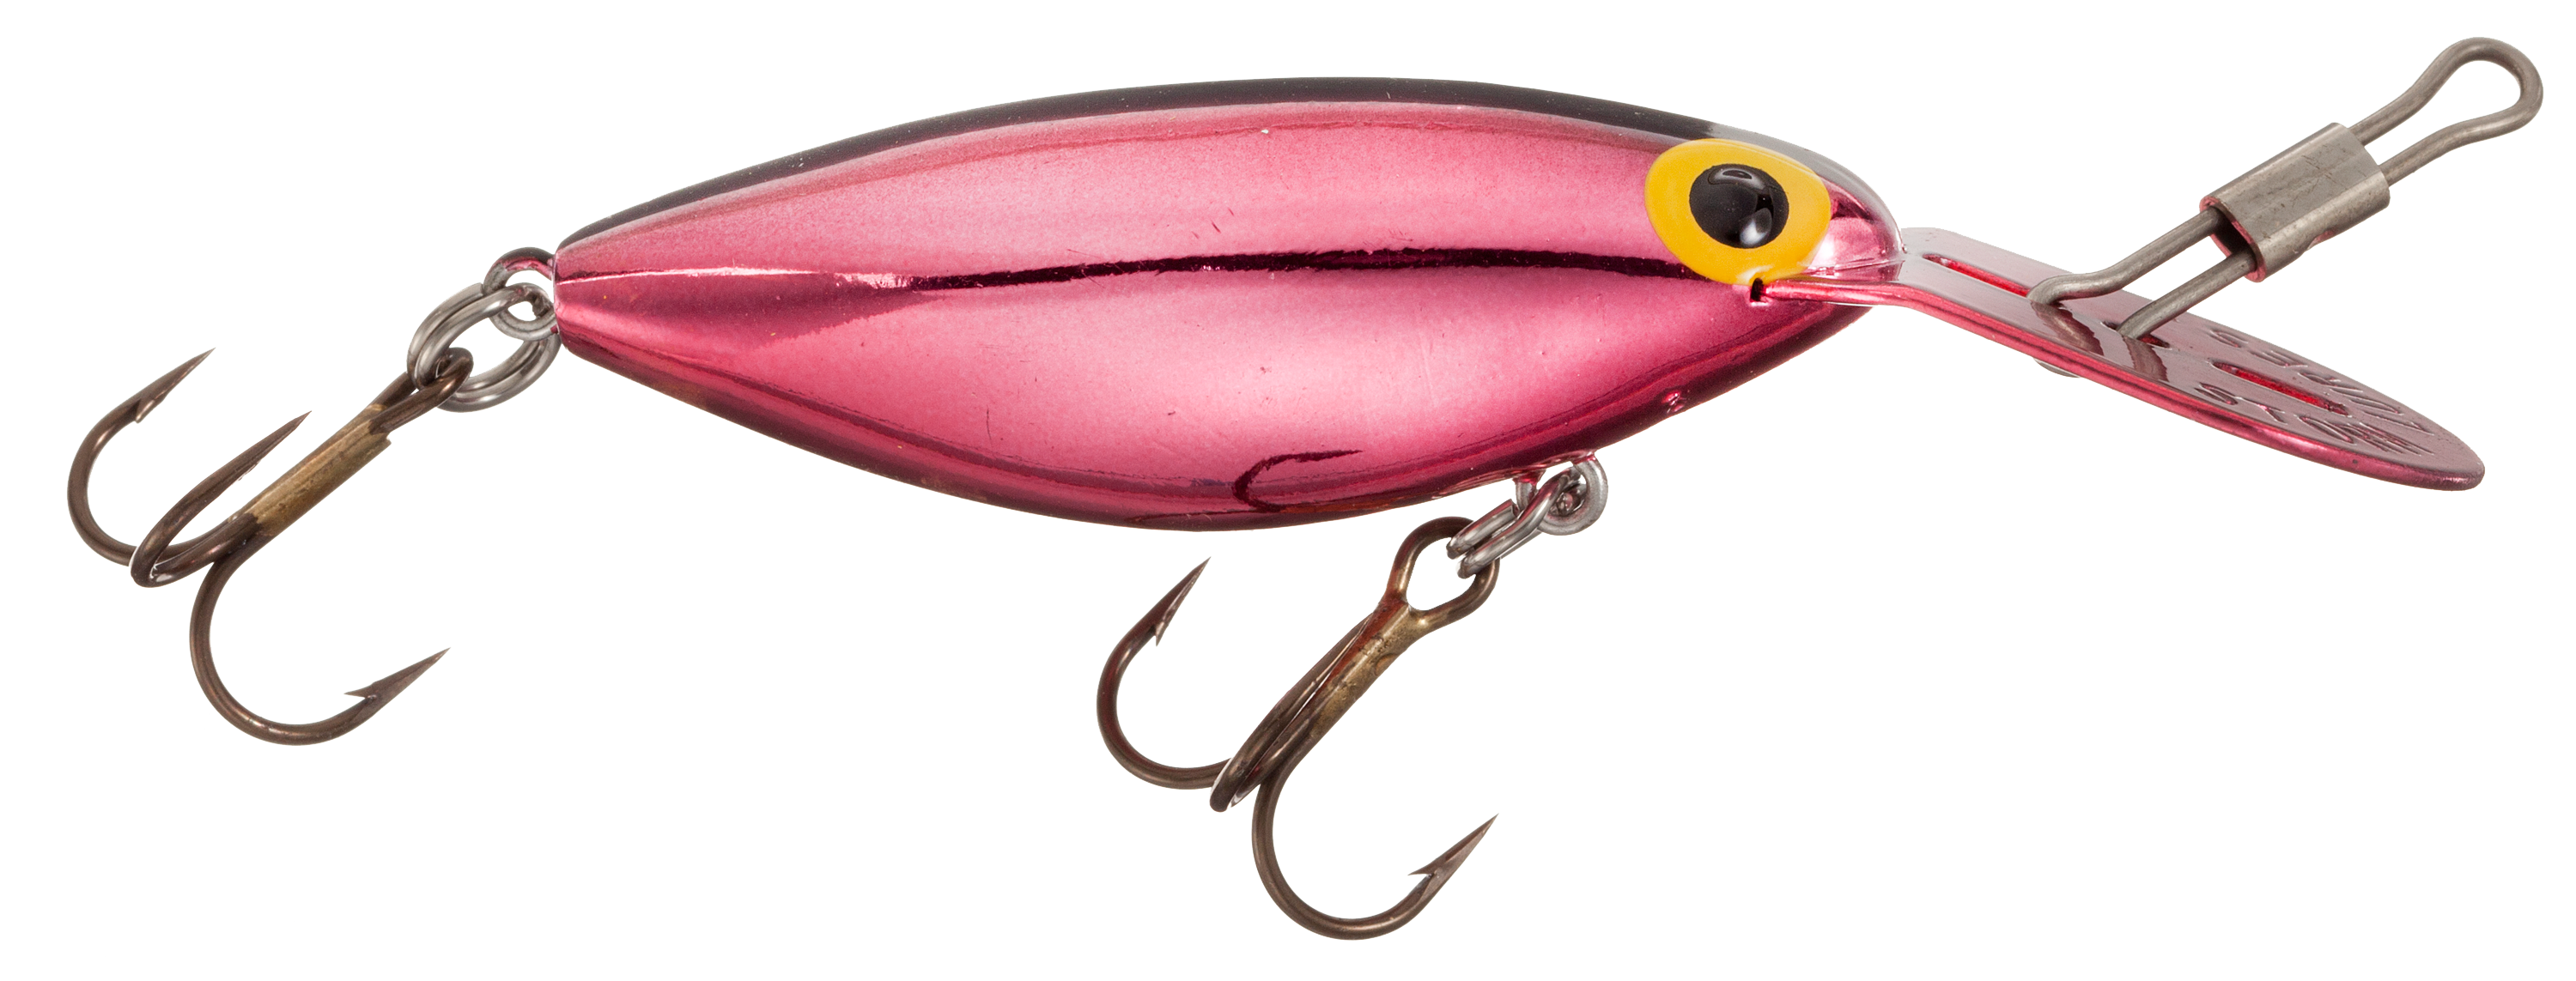 FishUSA - The Original Hot 'N Tot from Storm Lures is one of the all-time  best selling lures for trolling, back trolling, drift fishing, and casting  for salmon, steelhead, walleye, and other